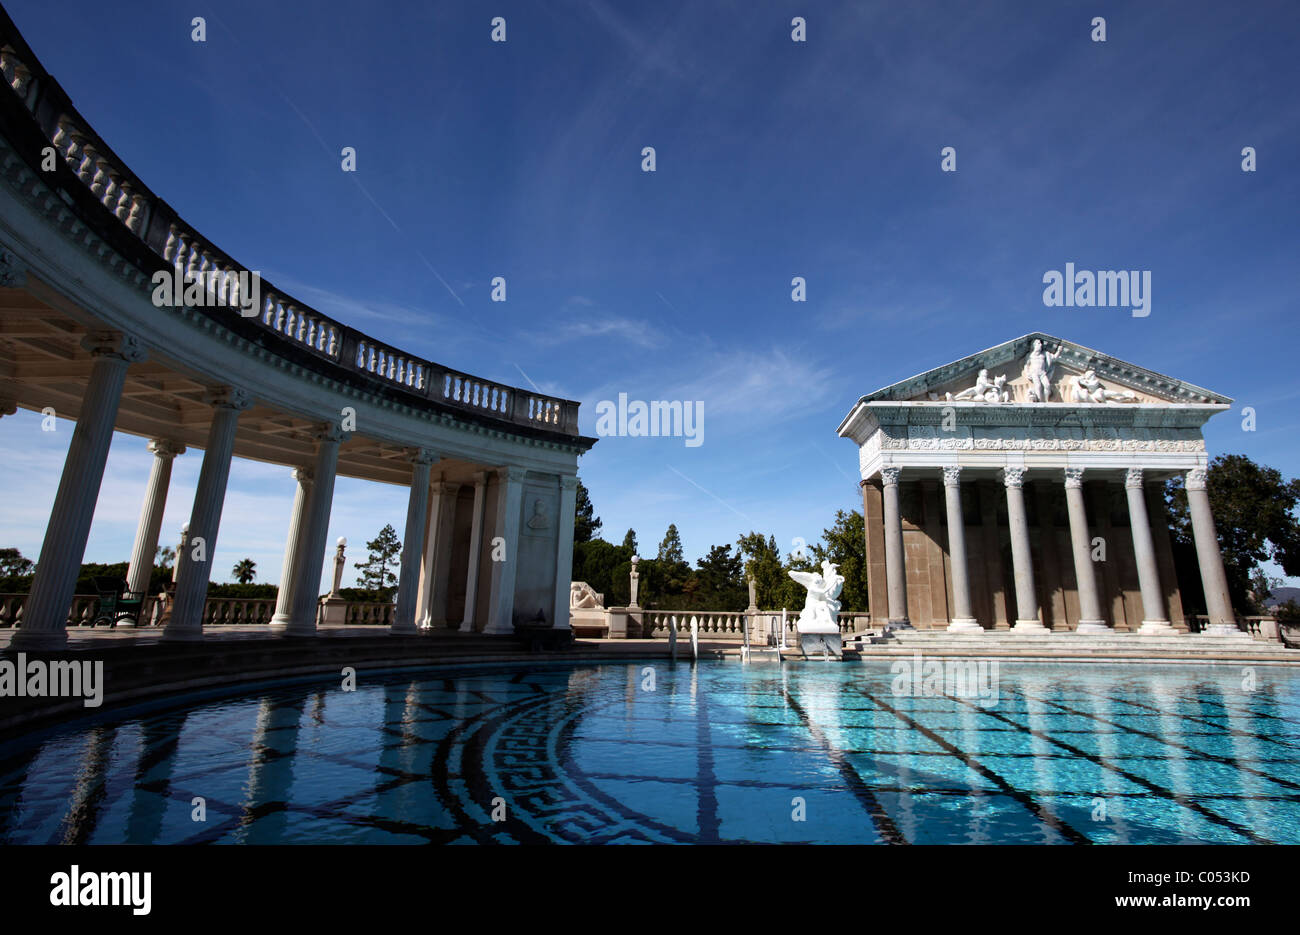 The courtyards of the Hearst Castle near San Simeon, California, where newspaper magnate William Randolph Hearst once lived. Stock Photo